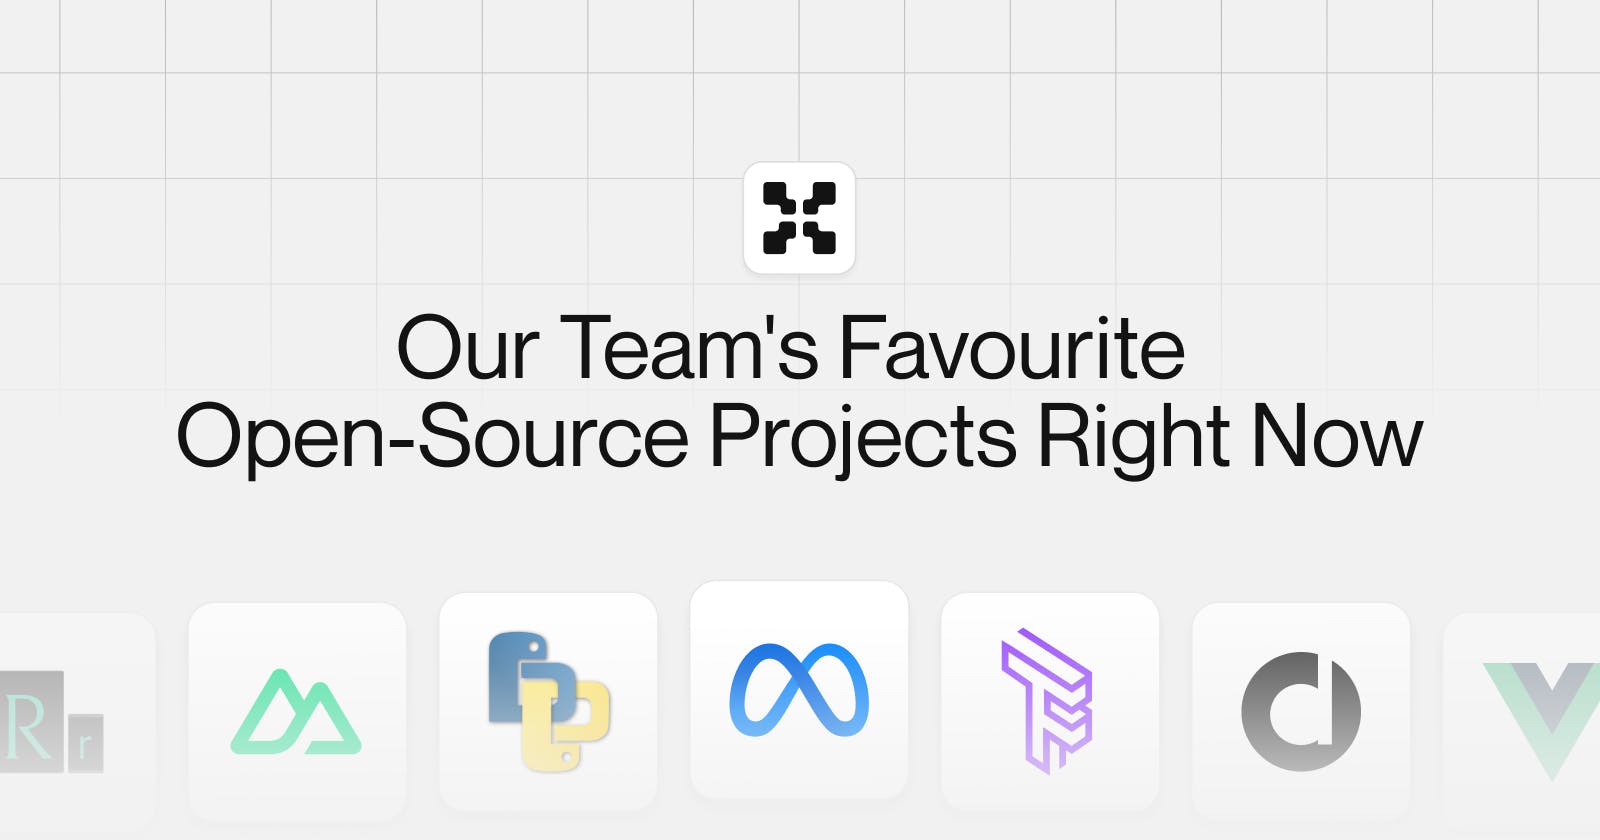 Our Team's Favourite Open Source Projects Right Now